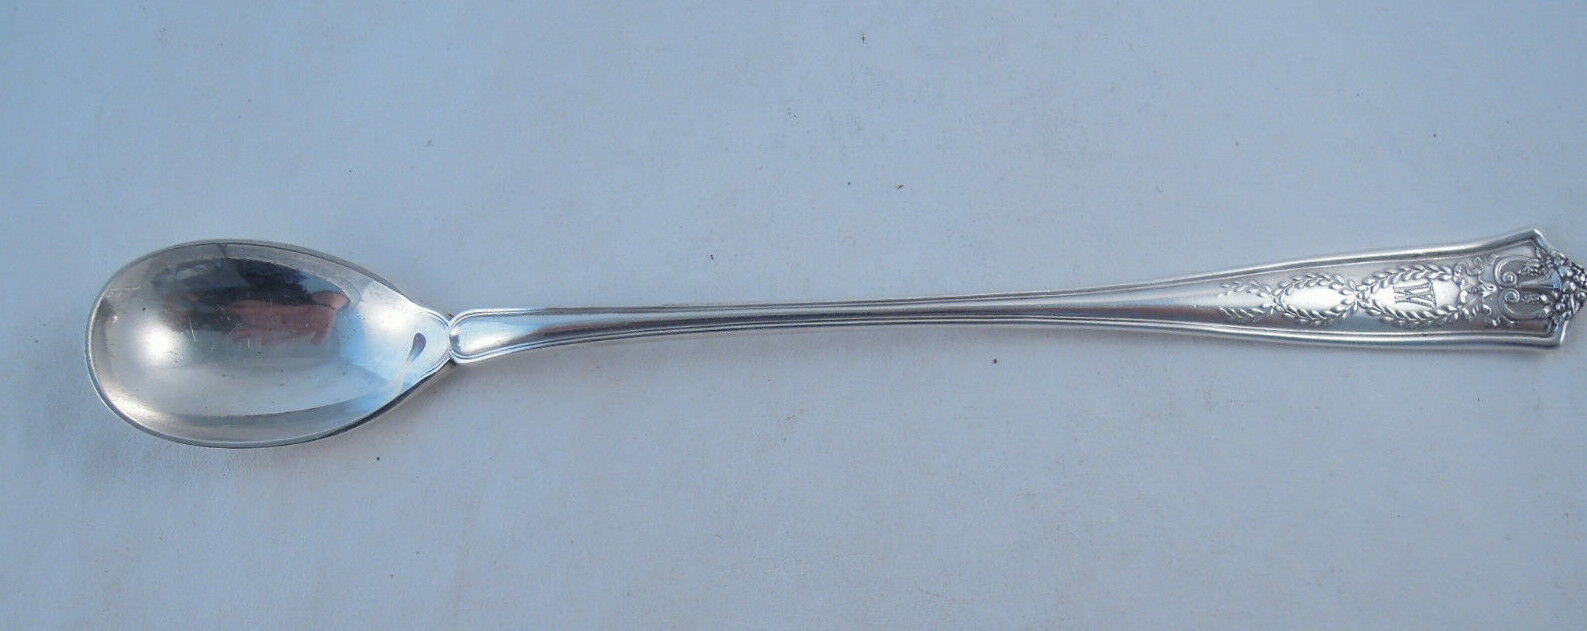 TIFFANY WINTHROP STERLING SILVER ICED TEA SPOON MULTIPLE AVAILABLE